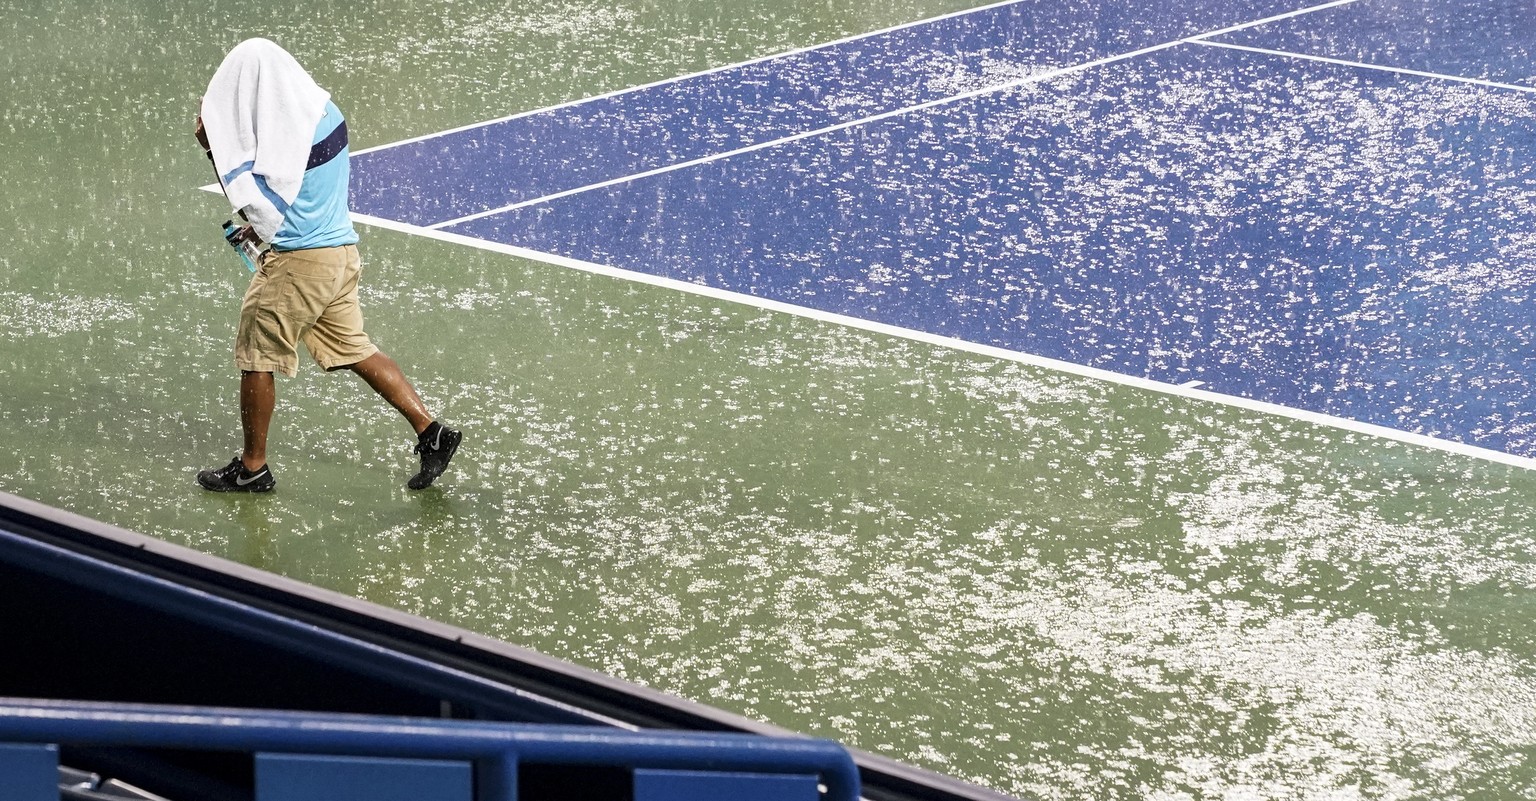 A court attendant moves toward shelter after play was suspended due to rain at the Western &amp; Southern Open tennis tournament Thursday, Aug. 16, 2018, in Mason, Ohio. (AP Photo/John Minchillo)